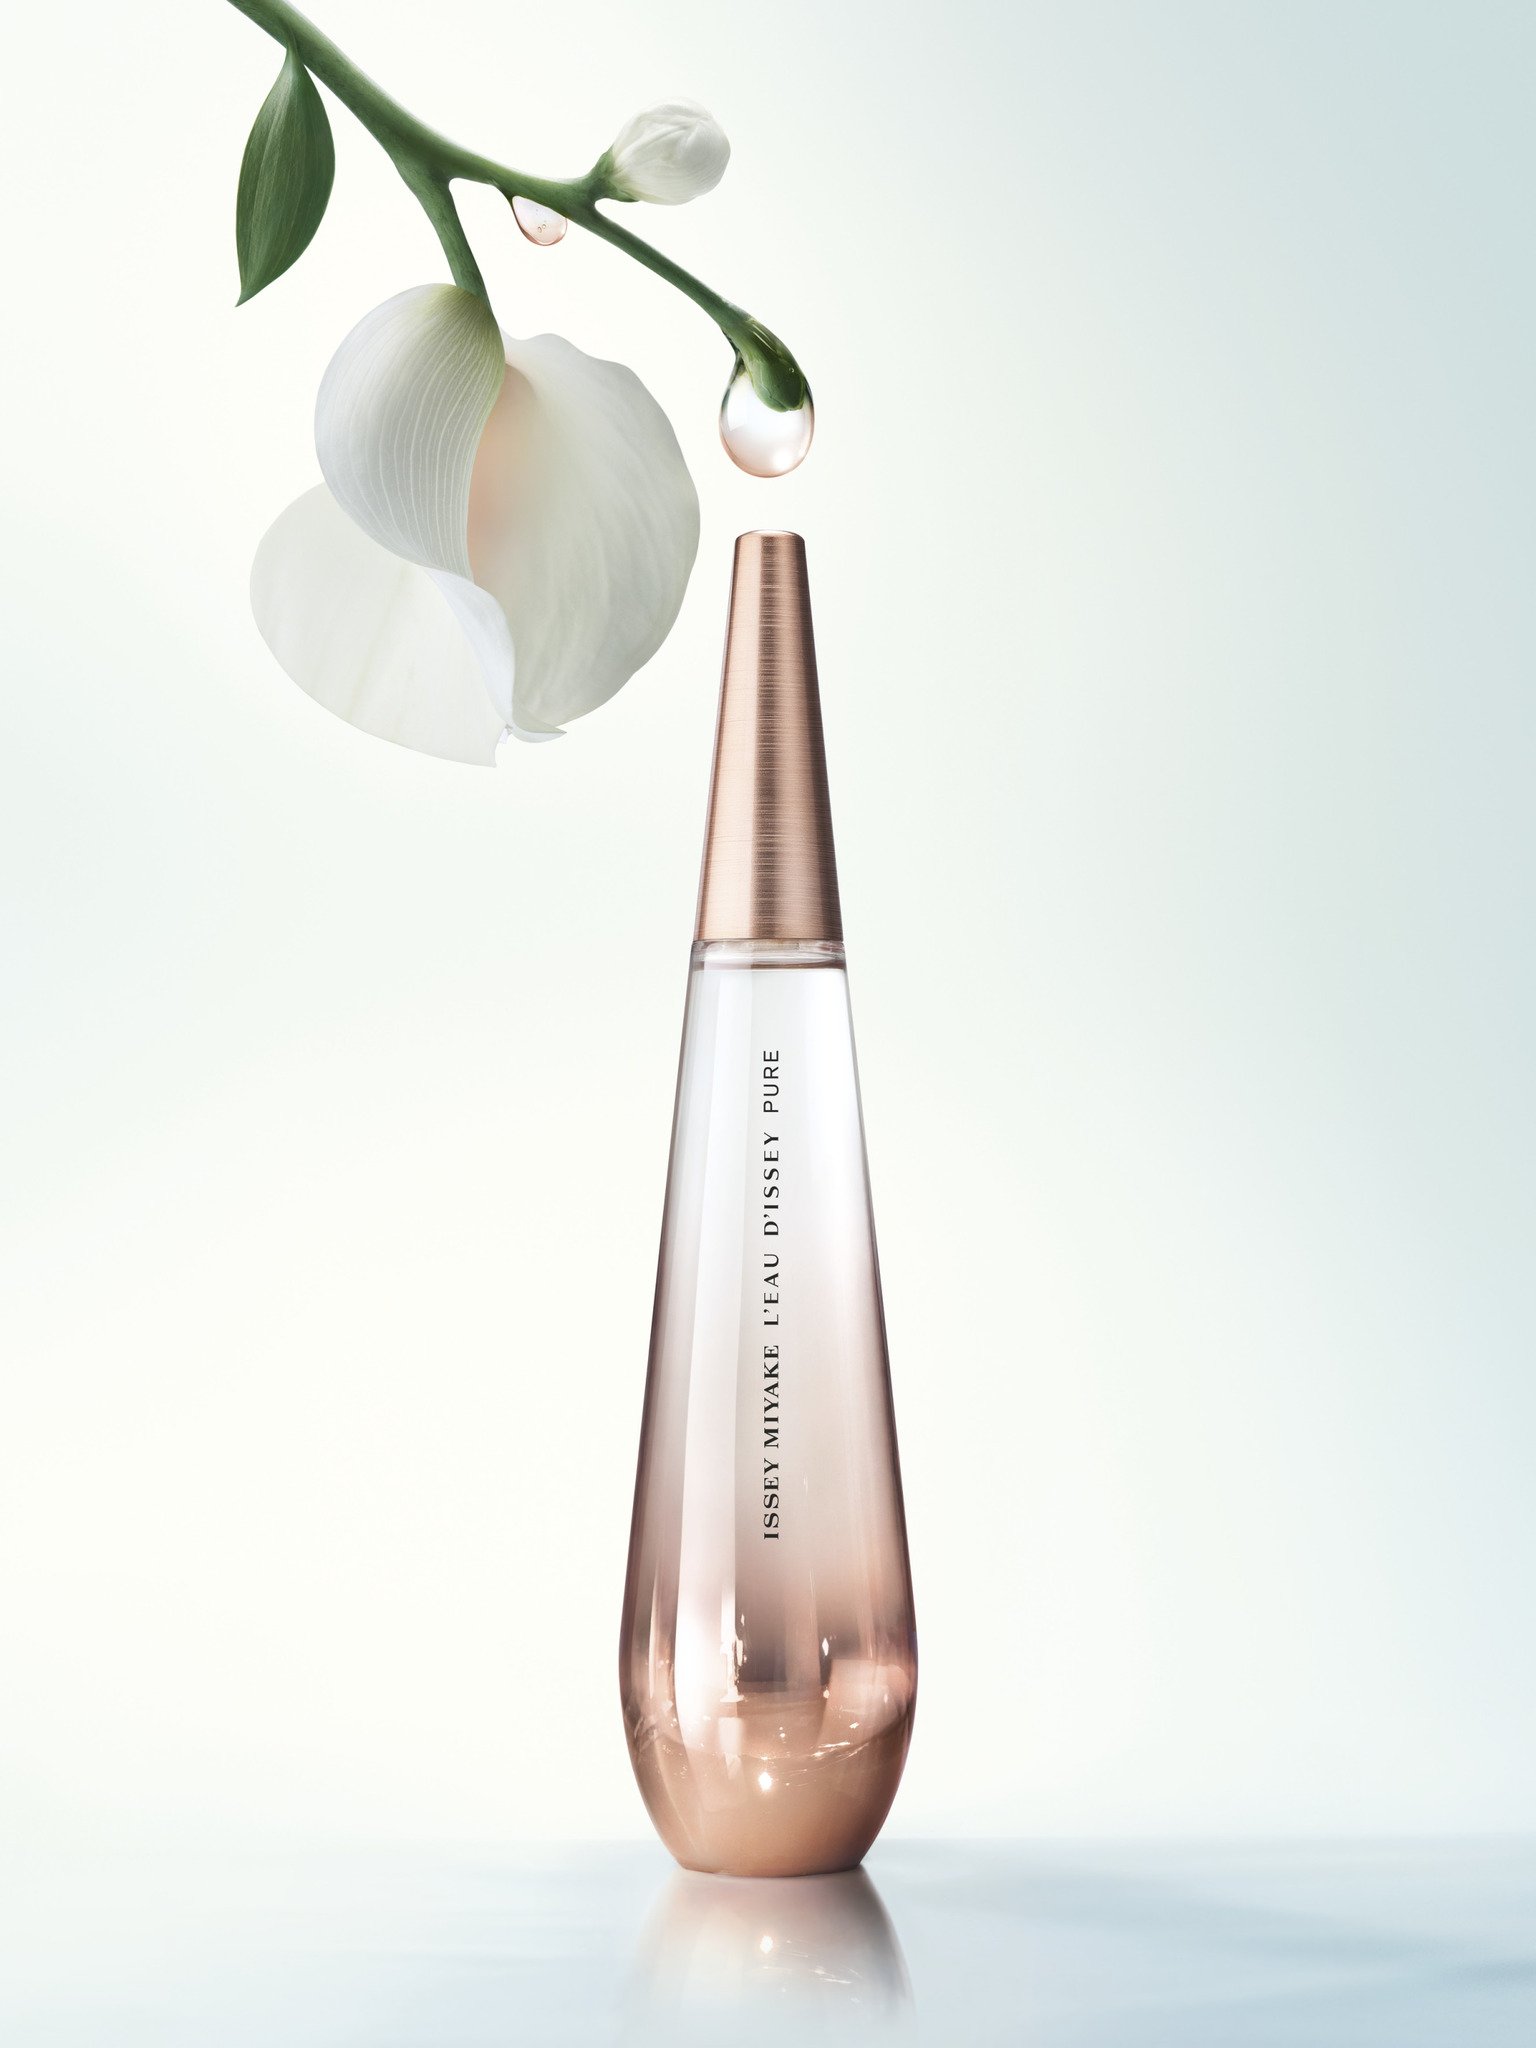 L'Eau d'Issey Pure Nectar